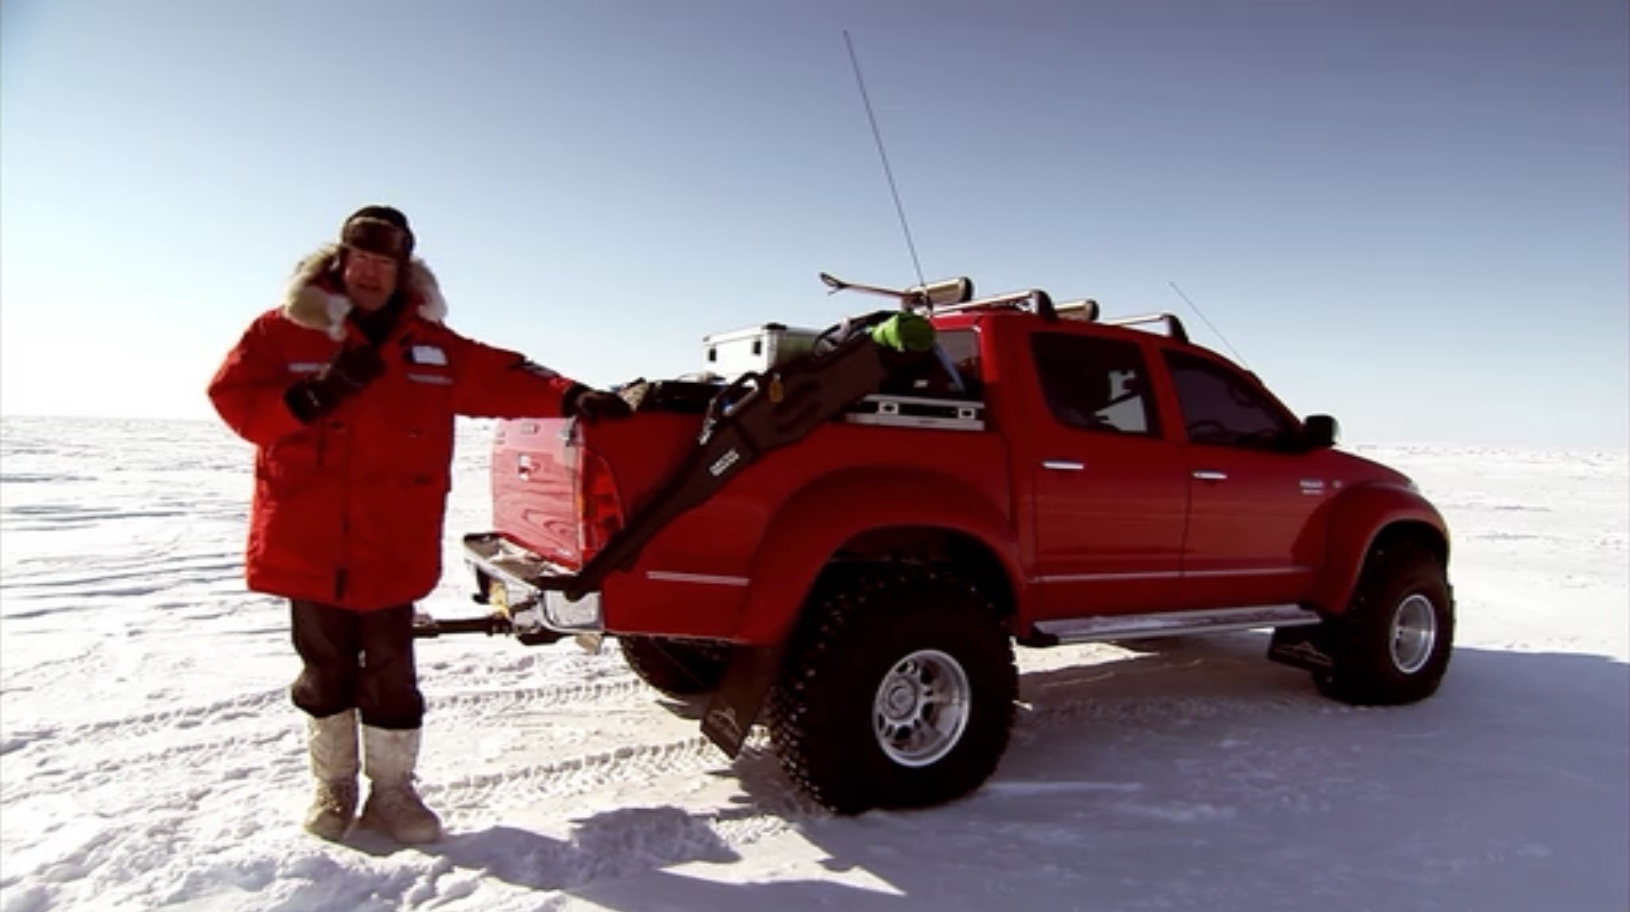 5 Best Top Gear Episodes All - Motor Review